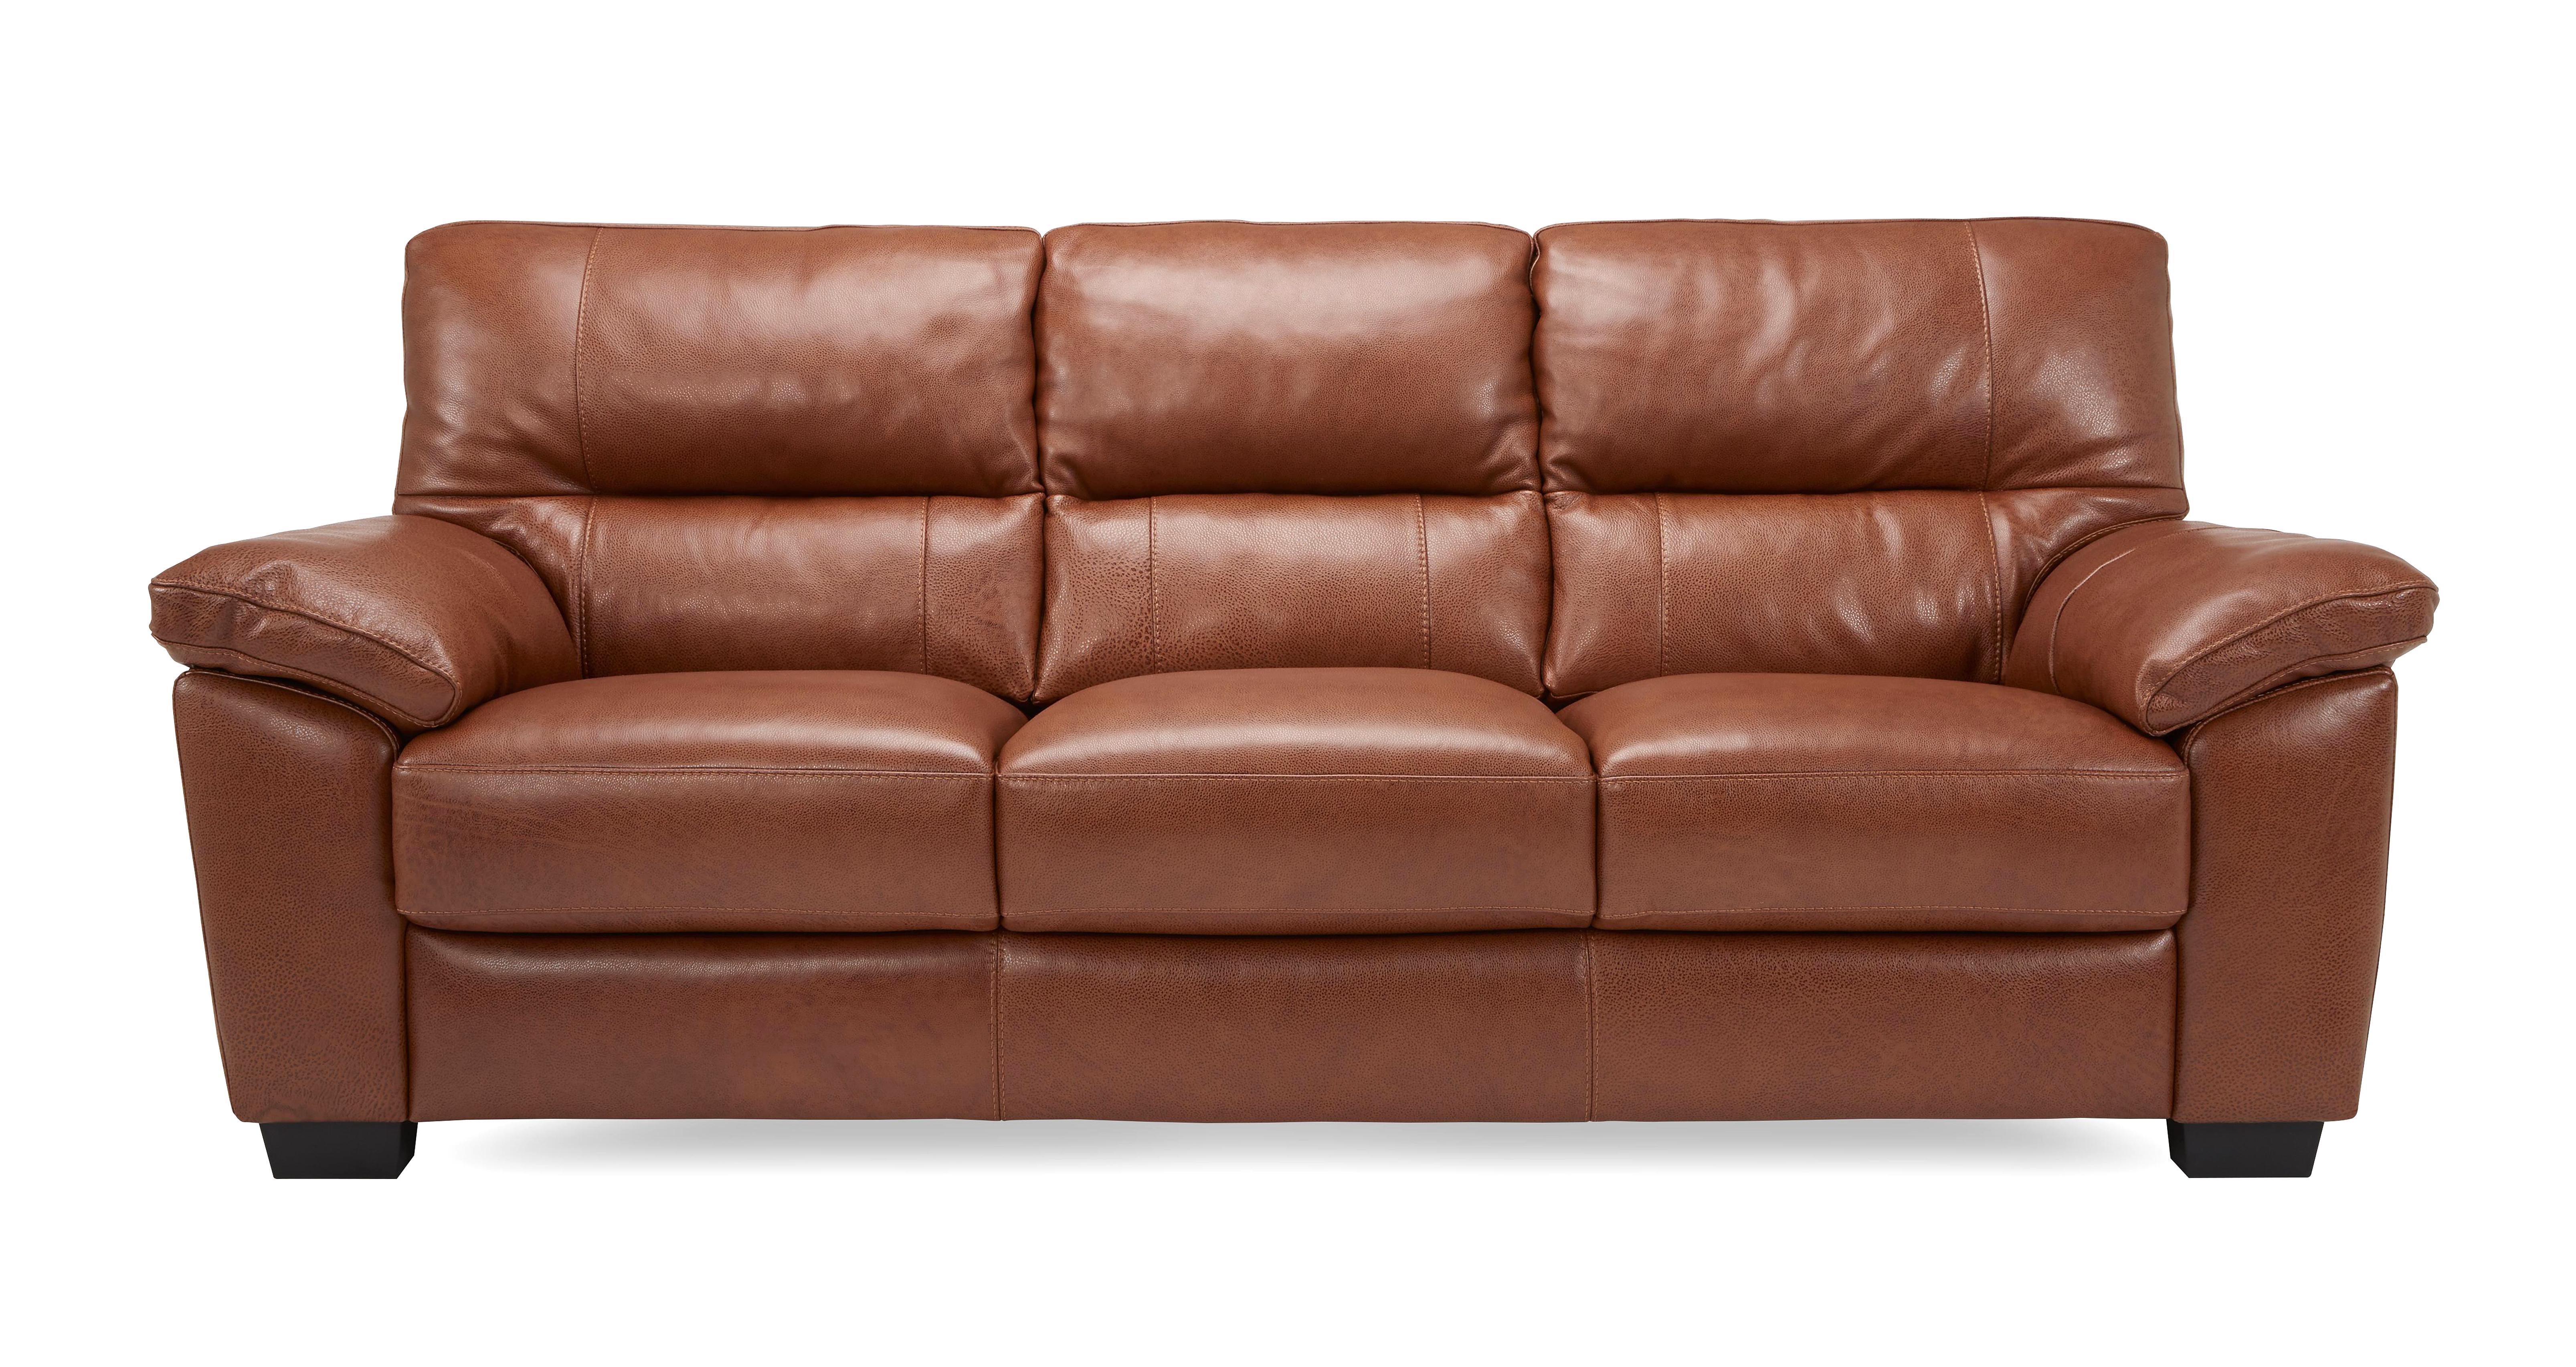 leather sofa sale uk only